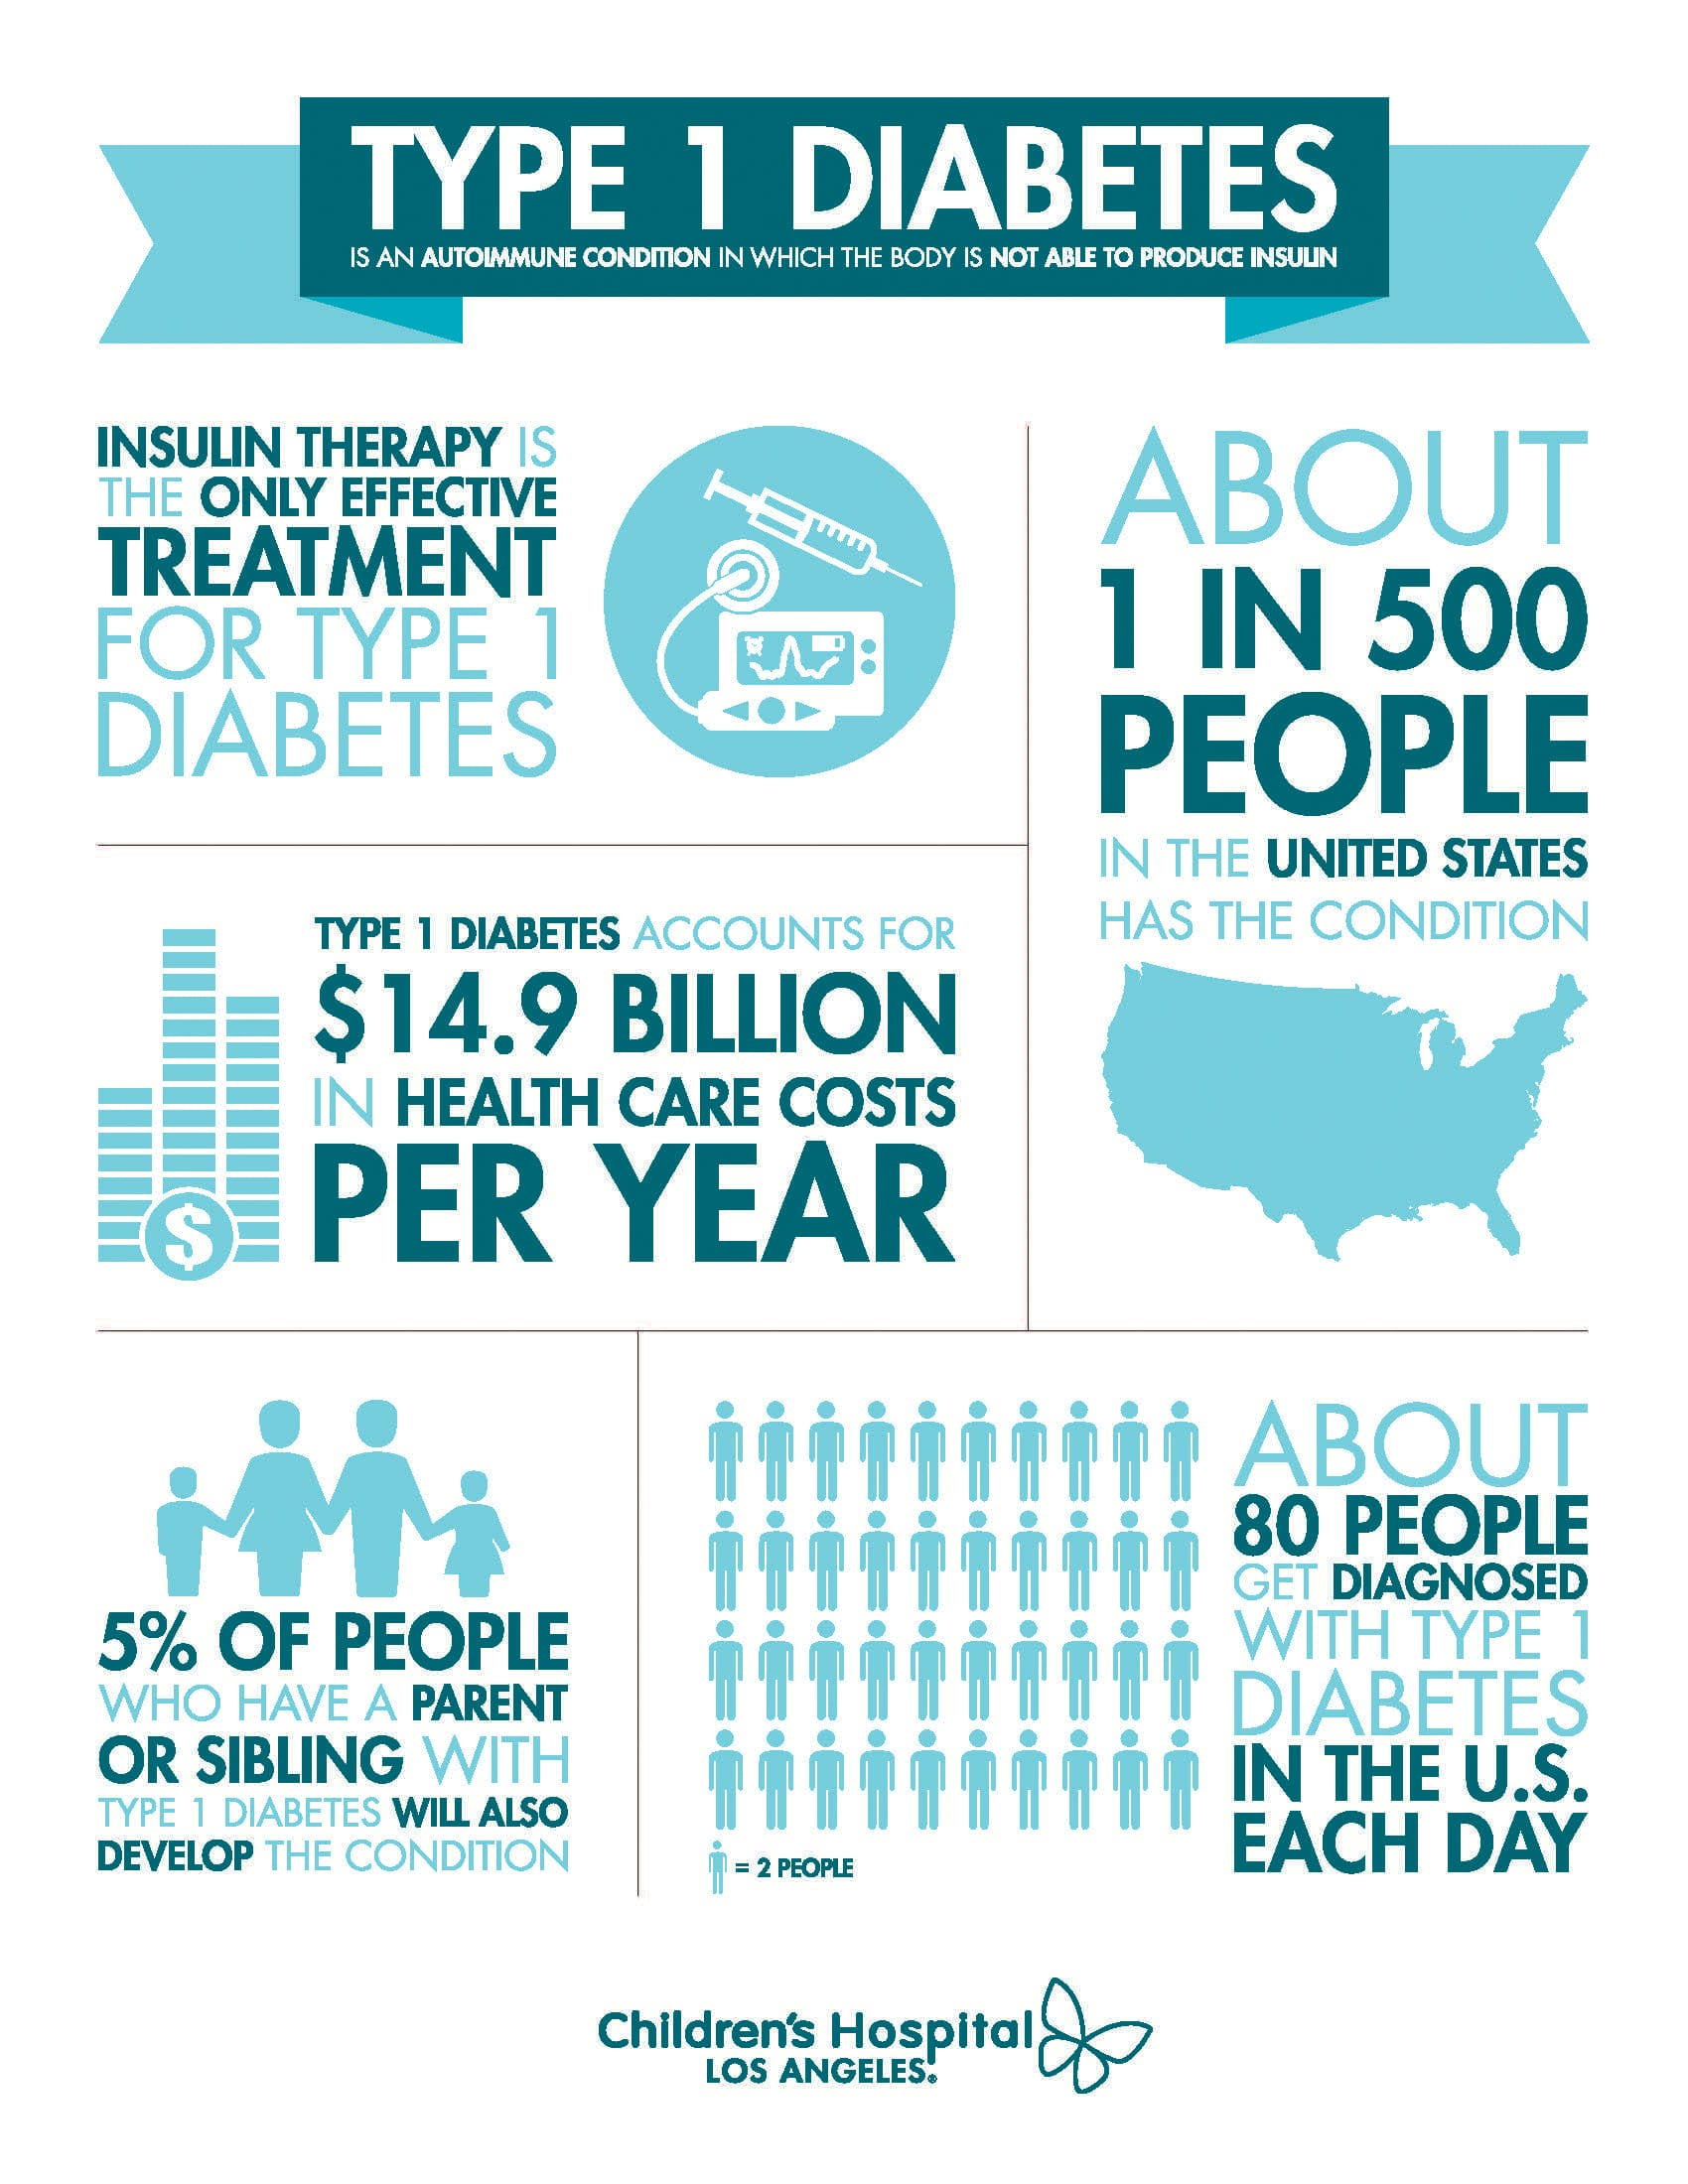 Symptoms, Treatment and Prevention of Type 1 Diabetes